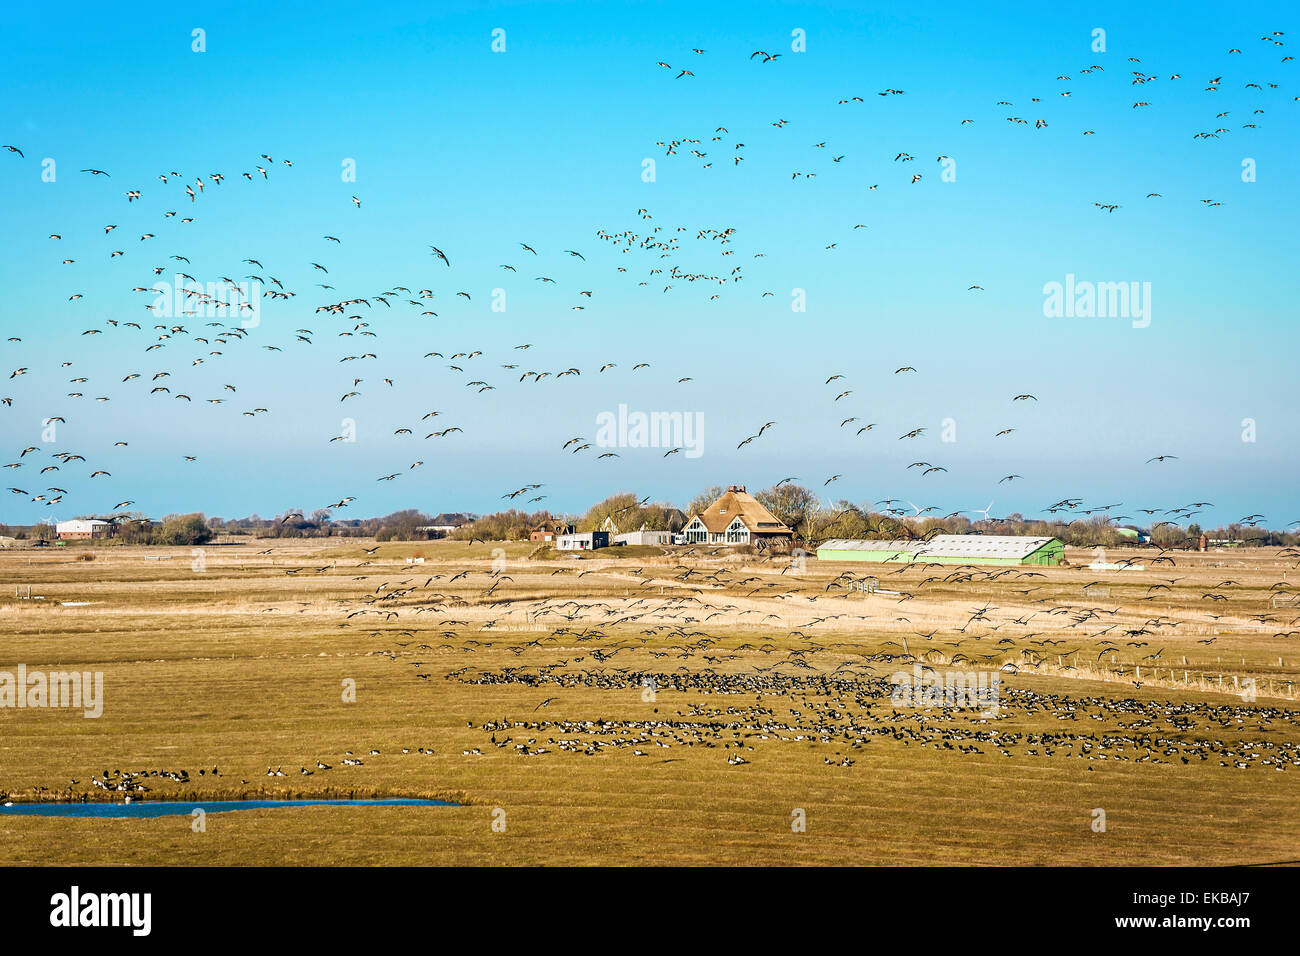 Landscape with house and birds Stock Photo